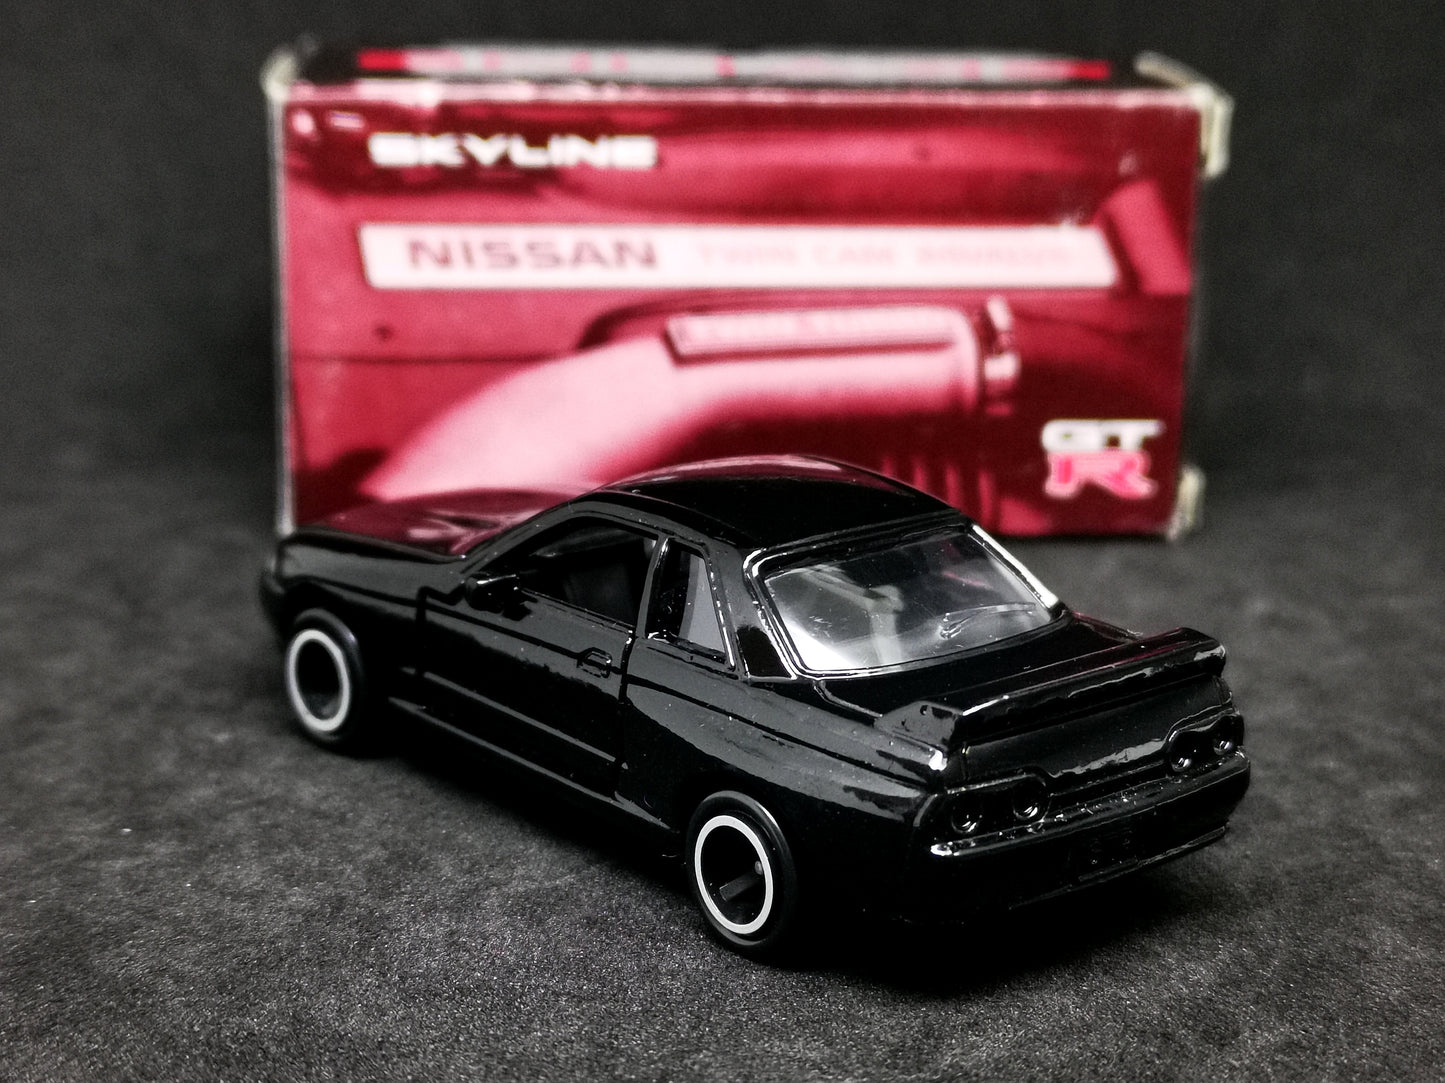 Tomica Ikeda Mini Car shop Exclusive Nissan Skyline GT-R R32 Made In Japan